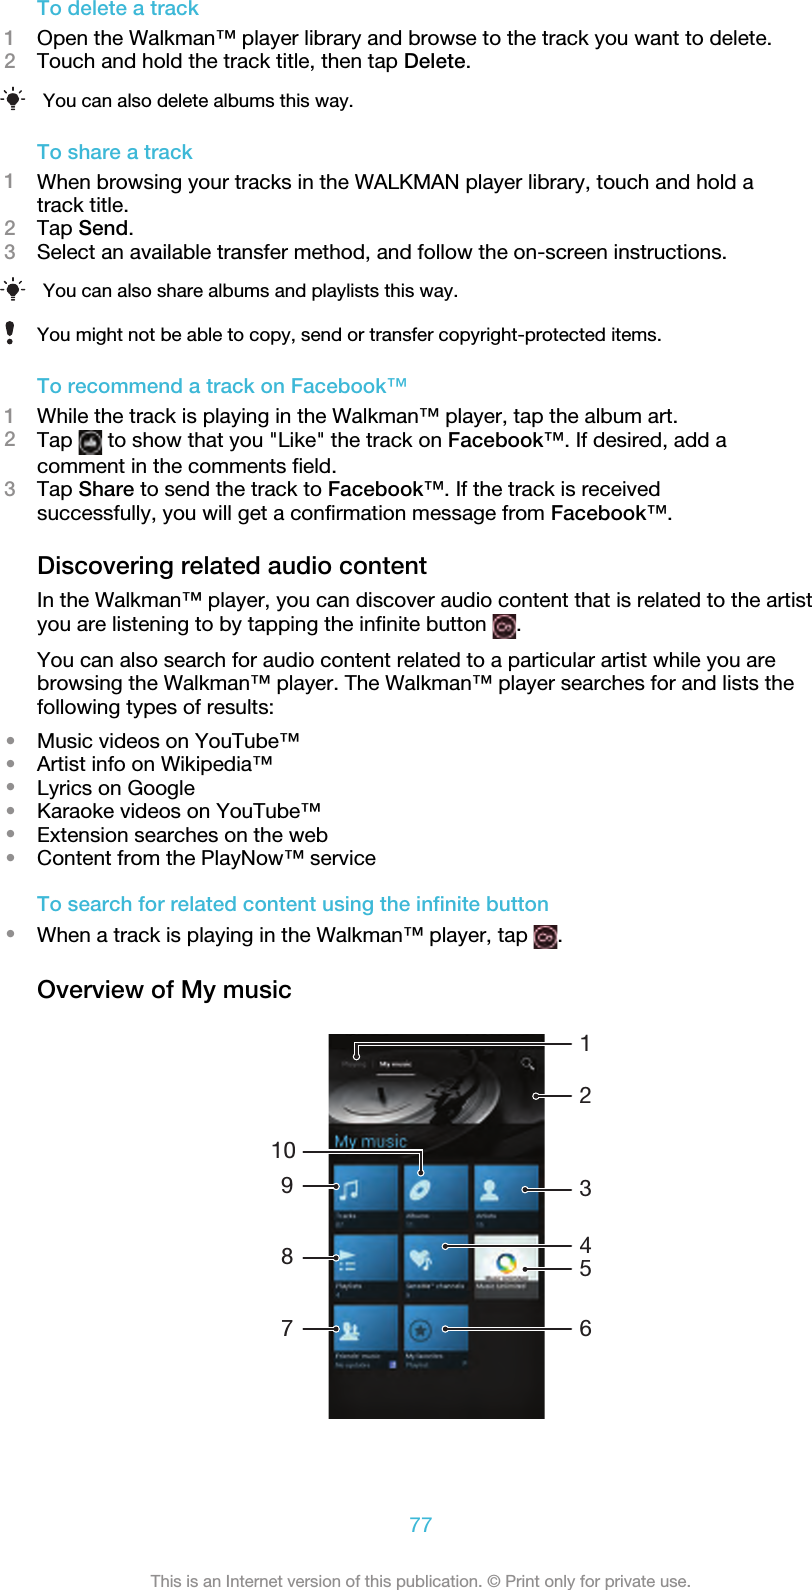 To delete a track1Open the Walkman™ player library and browse to the track you want to delete.2Touch and hold the track title, then tap Delete.You can also delete albums this way.To share a track1When browsing your tracks in the WALKMAN player library, touch and hold atrack title.2Tap Send.3Select an available transfer method, and follow the on-screen instructions.You can also share albums and playlists this way.You might not be able to copy, send or transfer copyright-protected items.To recommend a track on Facebook™1While the track is playing in the Walkman™ player, tap the album art.2Tap   to show that you &quot;Like&quot; the track on Facebook™. If desired, add acomment in the comments field.3Tap Share to send the track to Facebook™. If the track is receivedsuccessfully, you will get a confirmation message from Facebook™.Discovering related audio contentIn the Walkman™ player, you can discover audio content that is related to the artistyou are listening to by tapping the infinite button  .You can also search for audio content related to a particular artist while you arebrowsing the Walkman™ player. The Walkman™ player searches for and lists thefollowing types of results:•Music videos on YouTube™•Artist info on Wikipedia™•Lyrics on Google•Karaoke videos on YouTube™•Extension searches on the web•Content from the PlayNow™ serviceTo search for related content using the infinite button•When a track is playing in the Walkman™ player, tap  .Overview of My music1031274689577This is an Internet version of this publication. © Print only for private use.